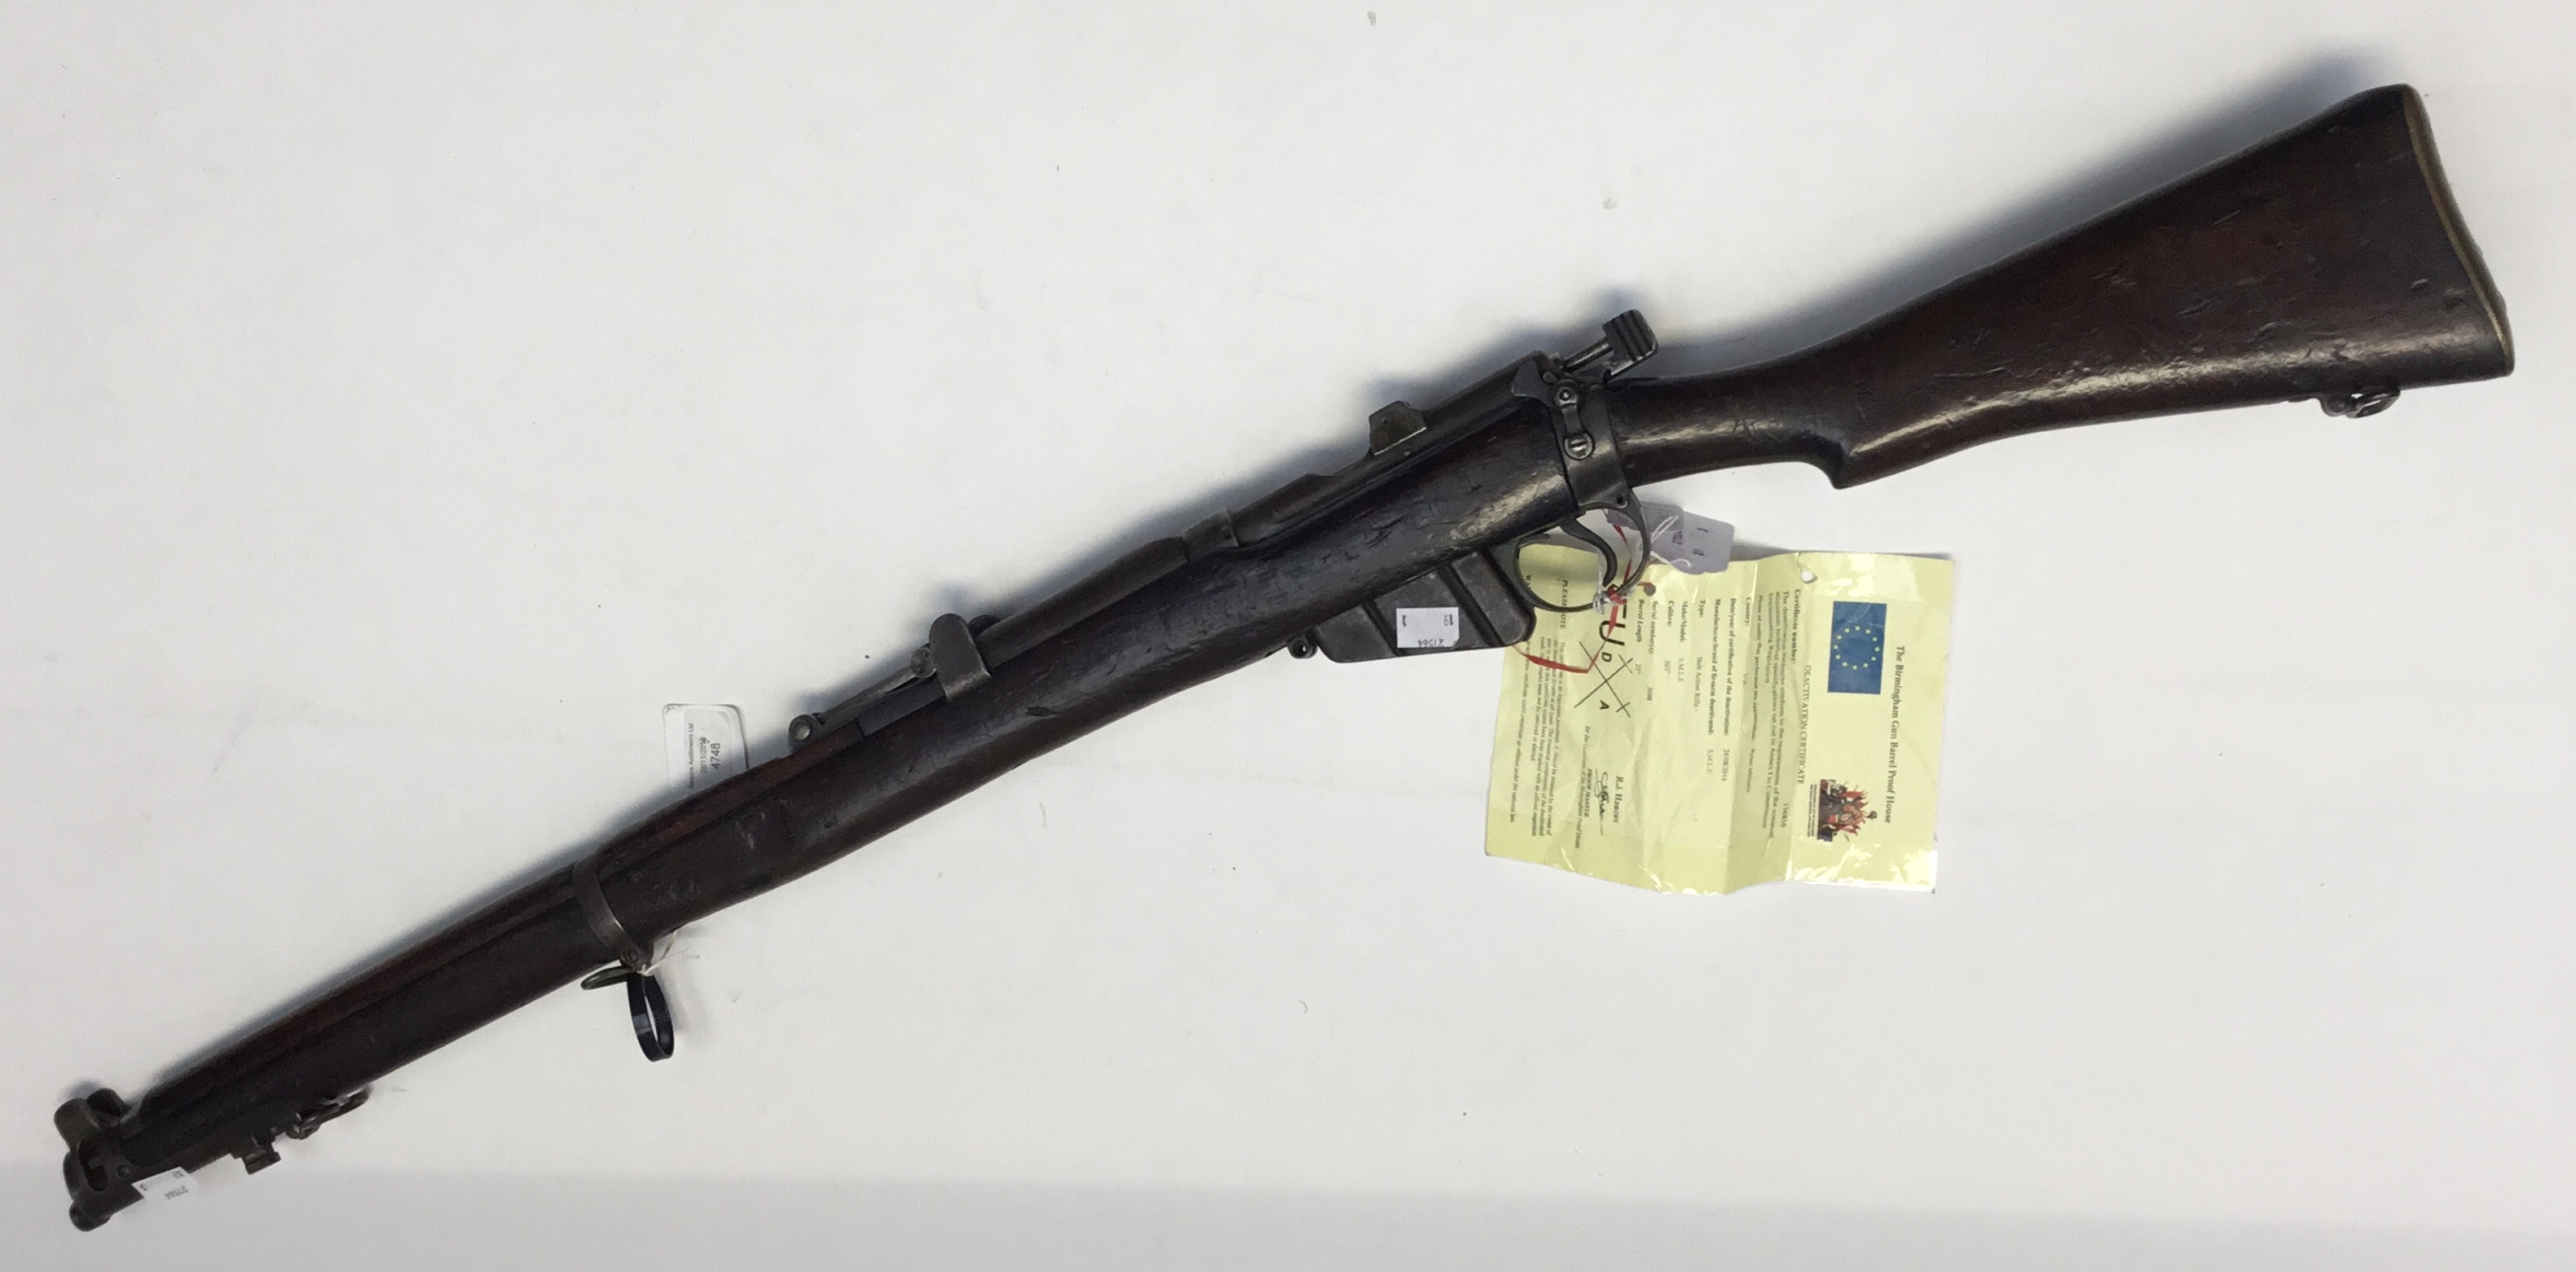 Deactivated* 1916 Short Magazine Lee Enfield Service Rifle. Good example with some wear and marks - Image 5 of 5